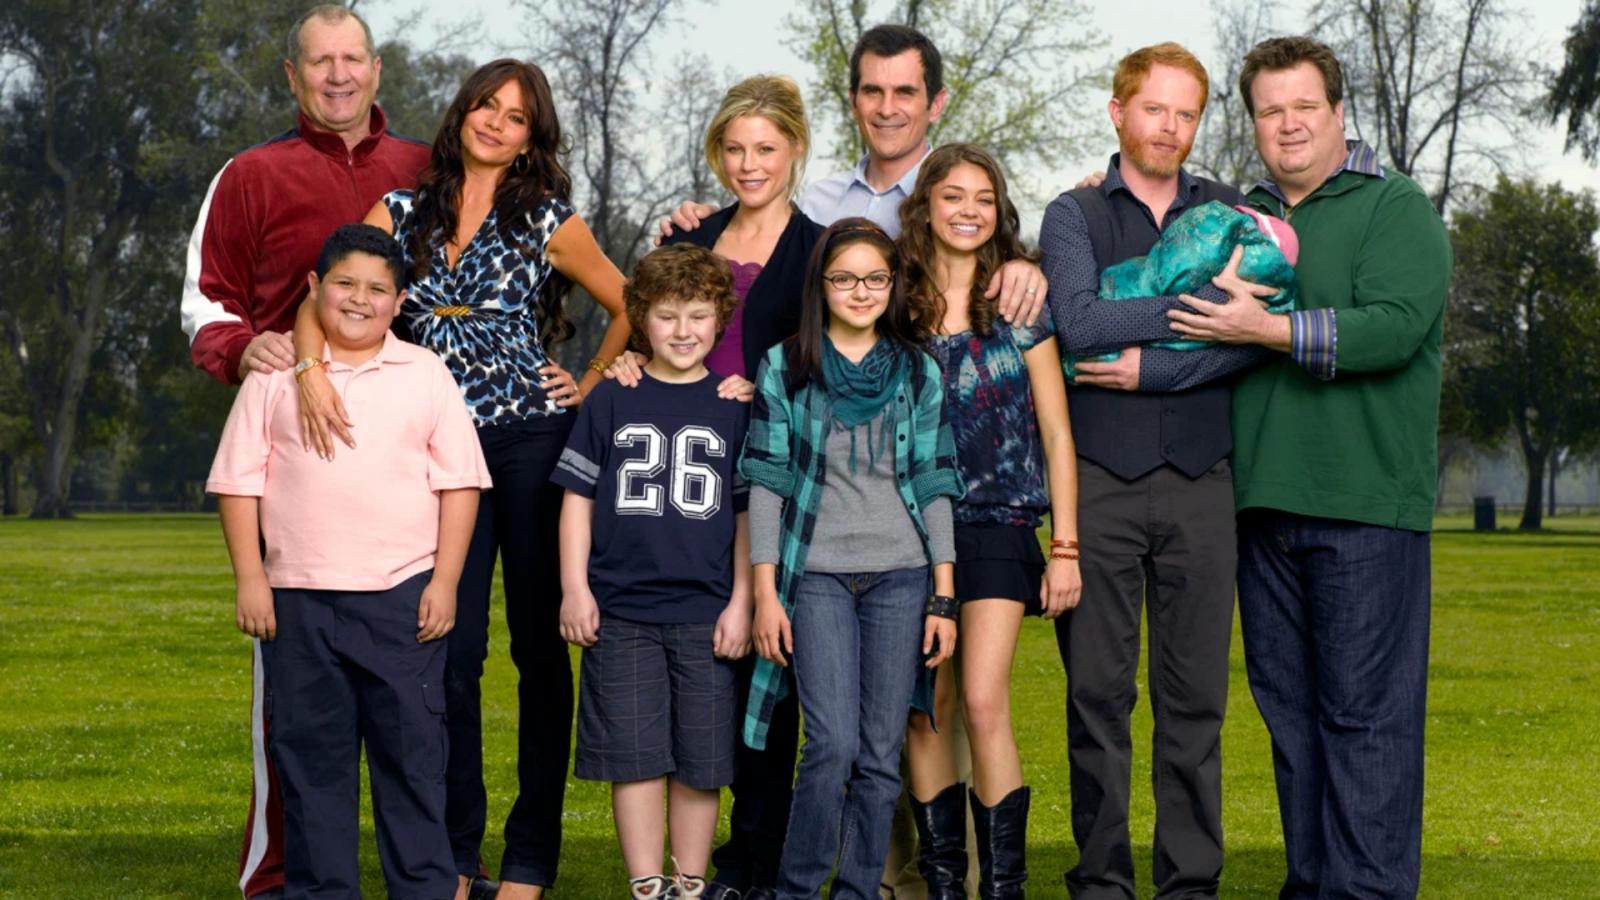 10 TV Families That Remind Us of the Reagans from Blue Bloods - image 9